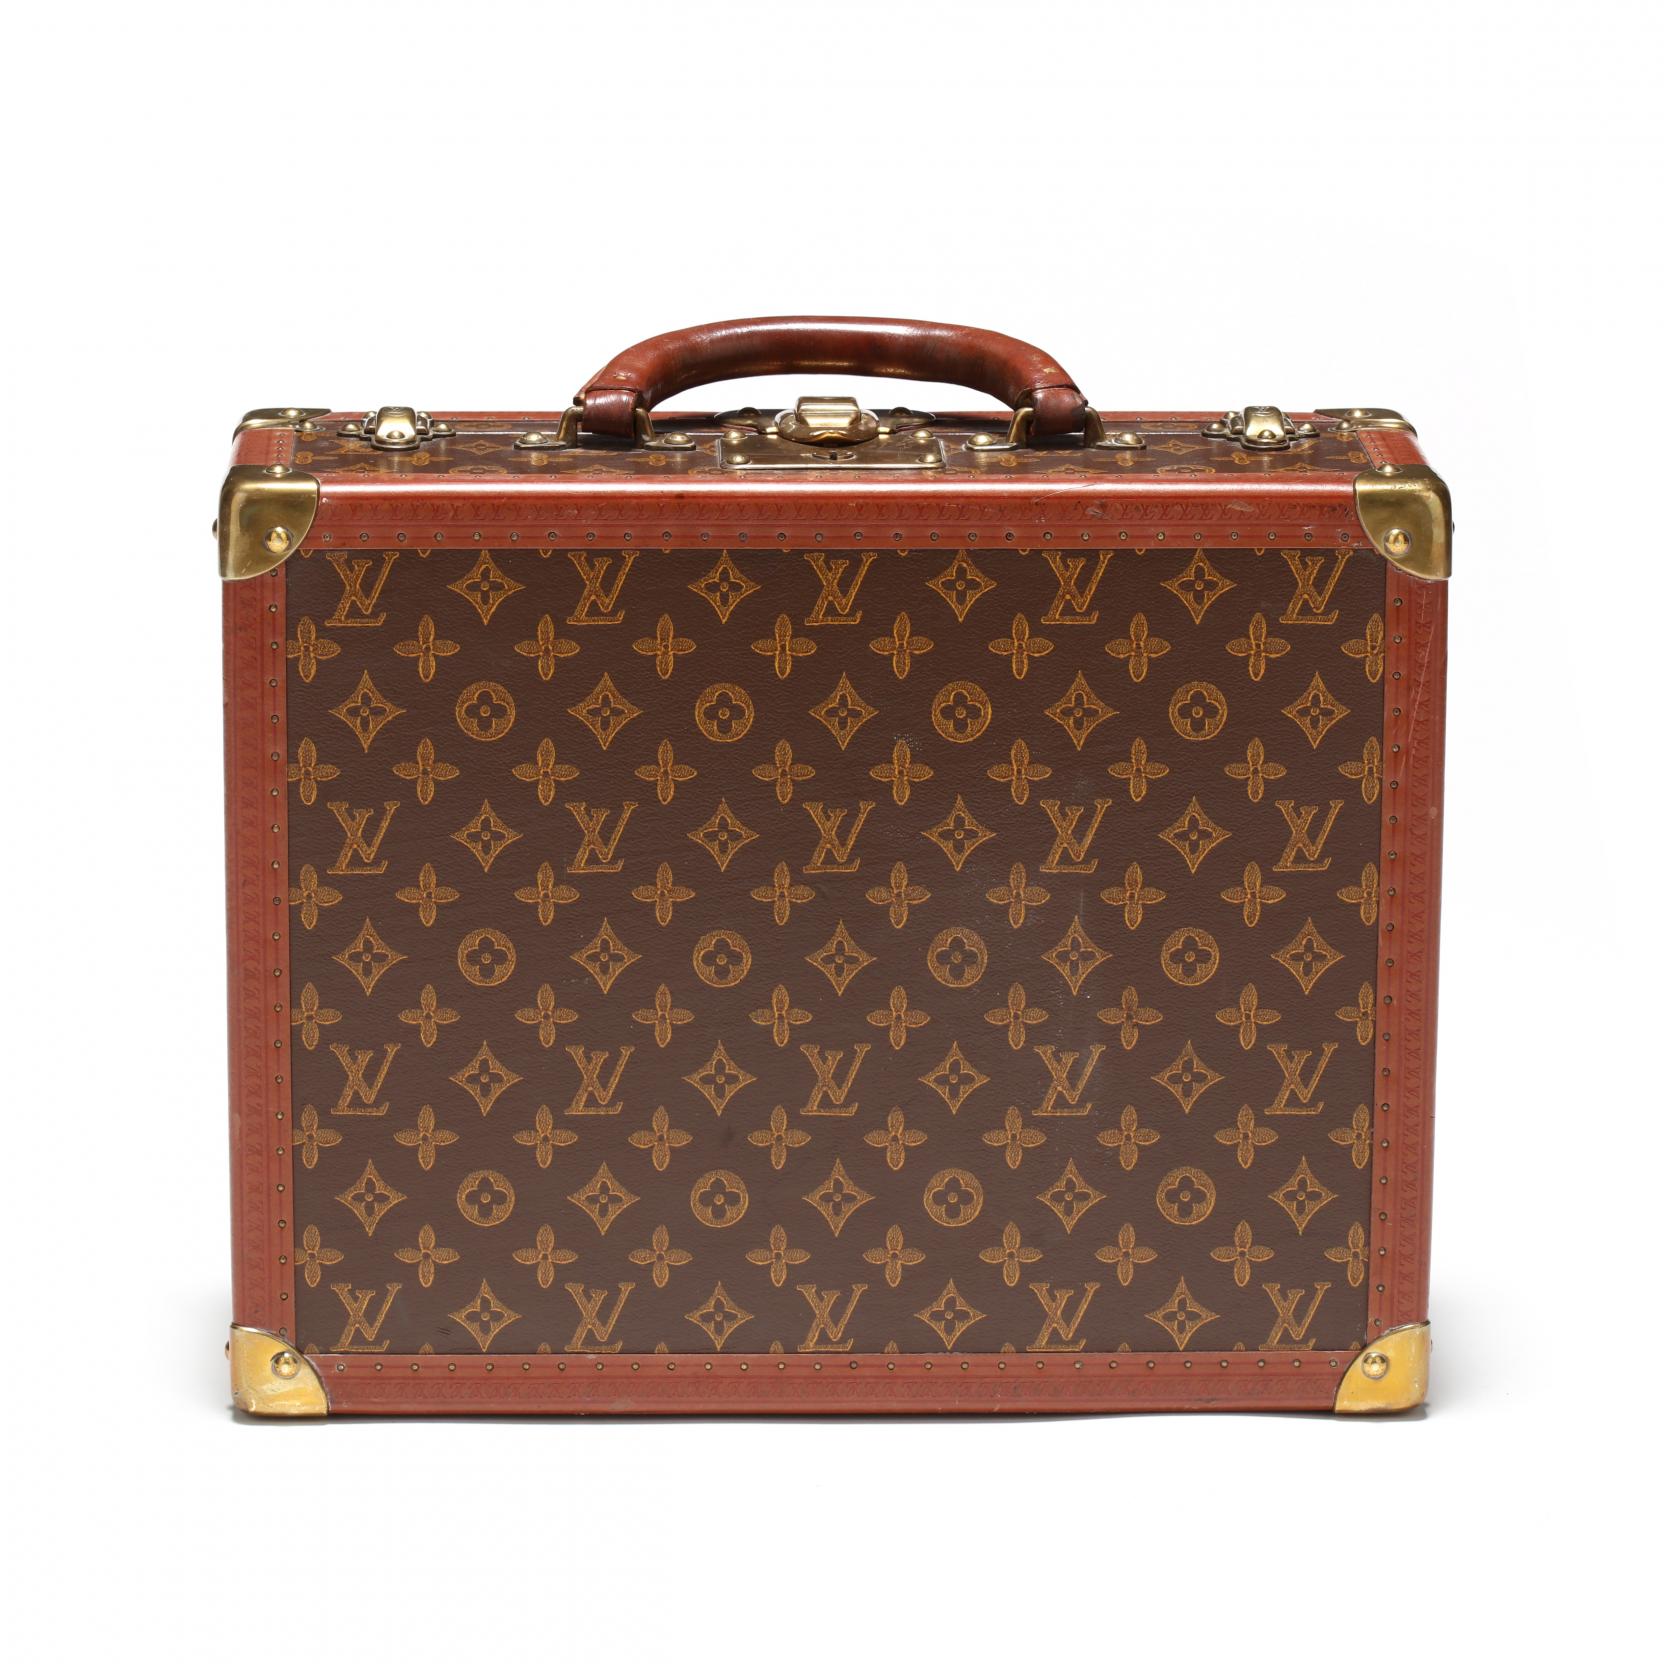 Sold at Auction: LOUIS VUITTON, KOFFER COTTEVILLE